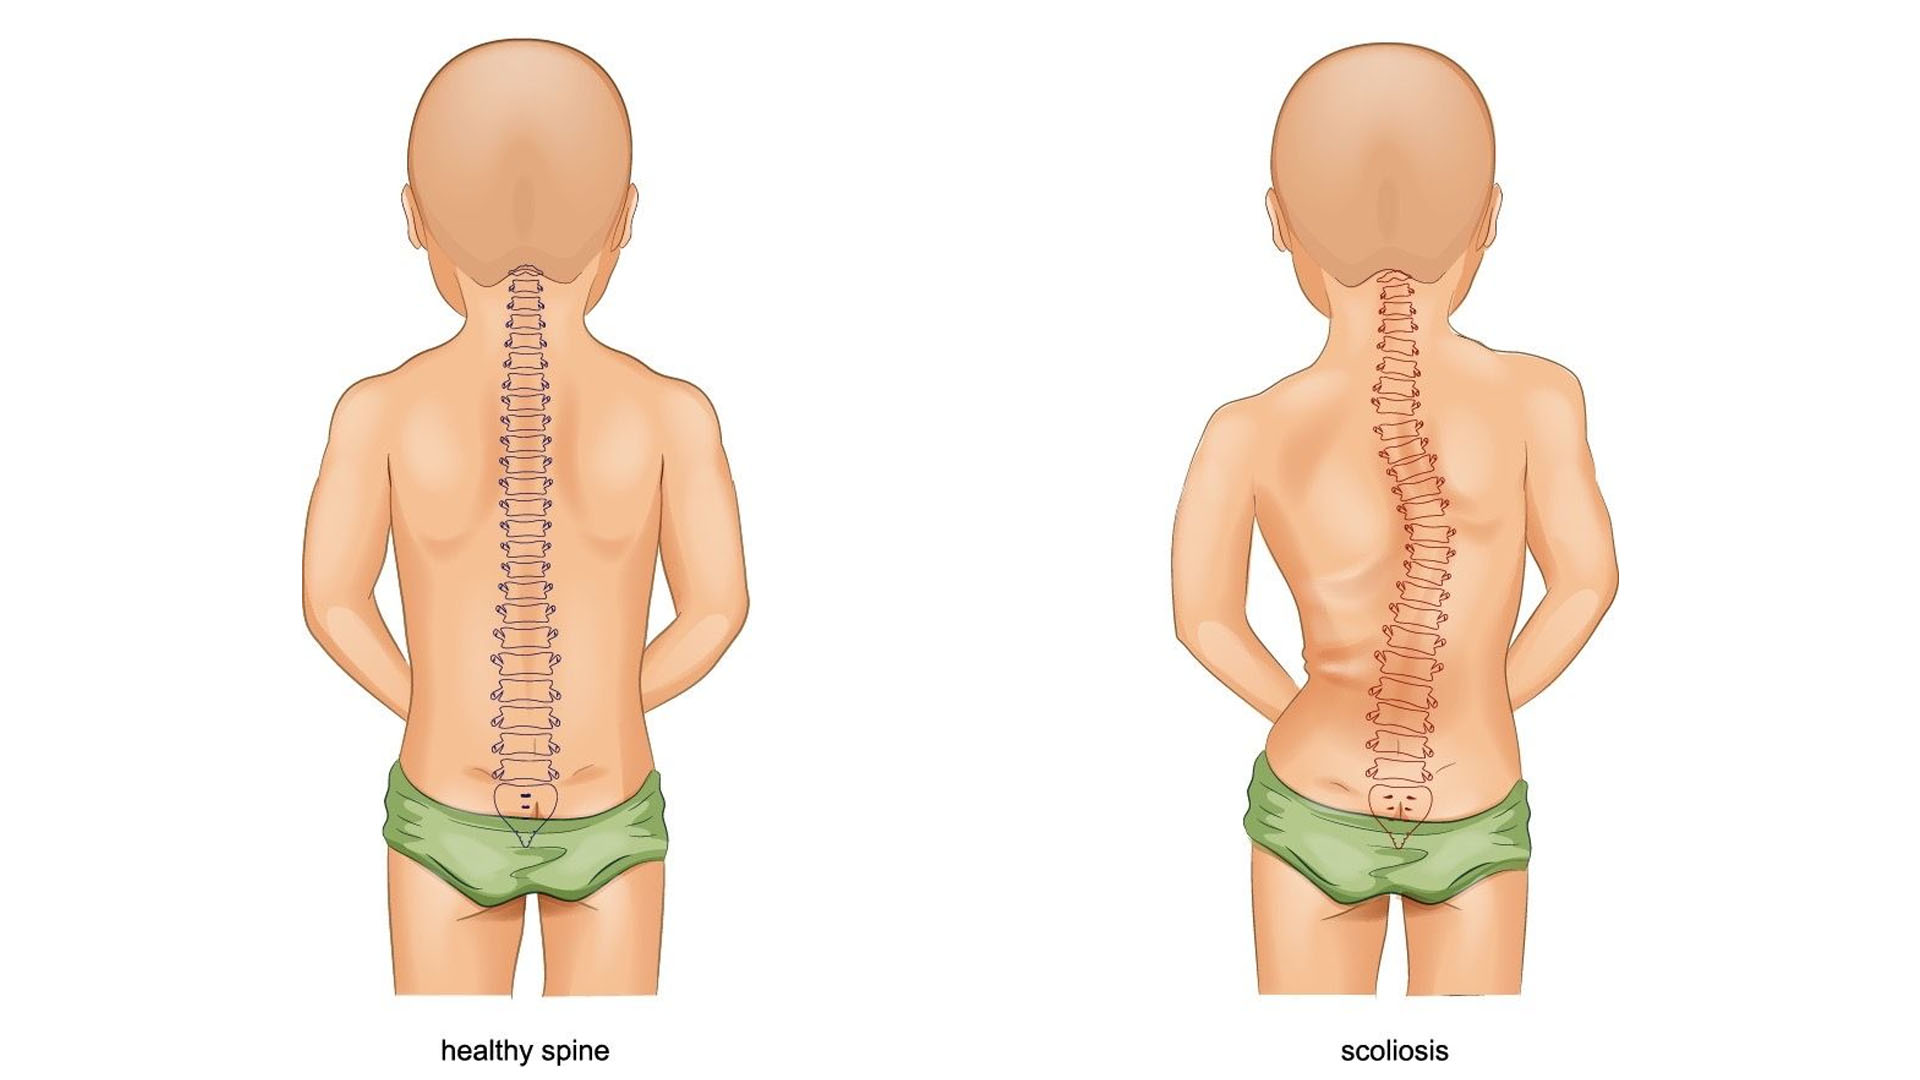 Why do the children happen to be at high risk for Scoliosis?